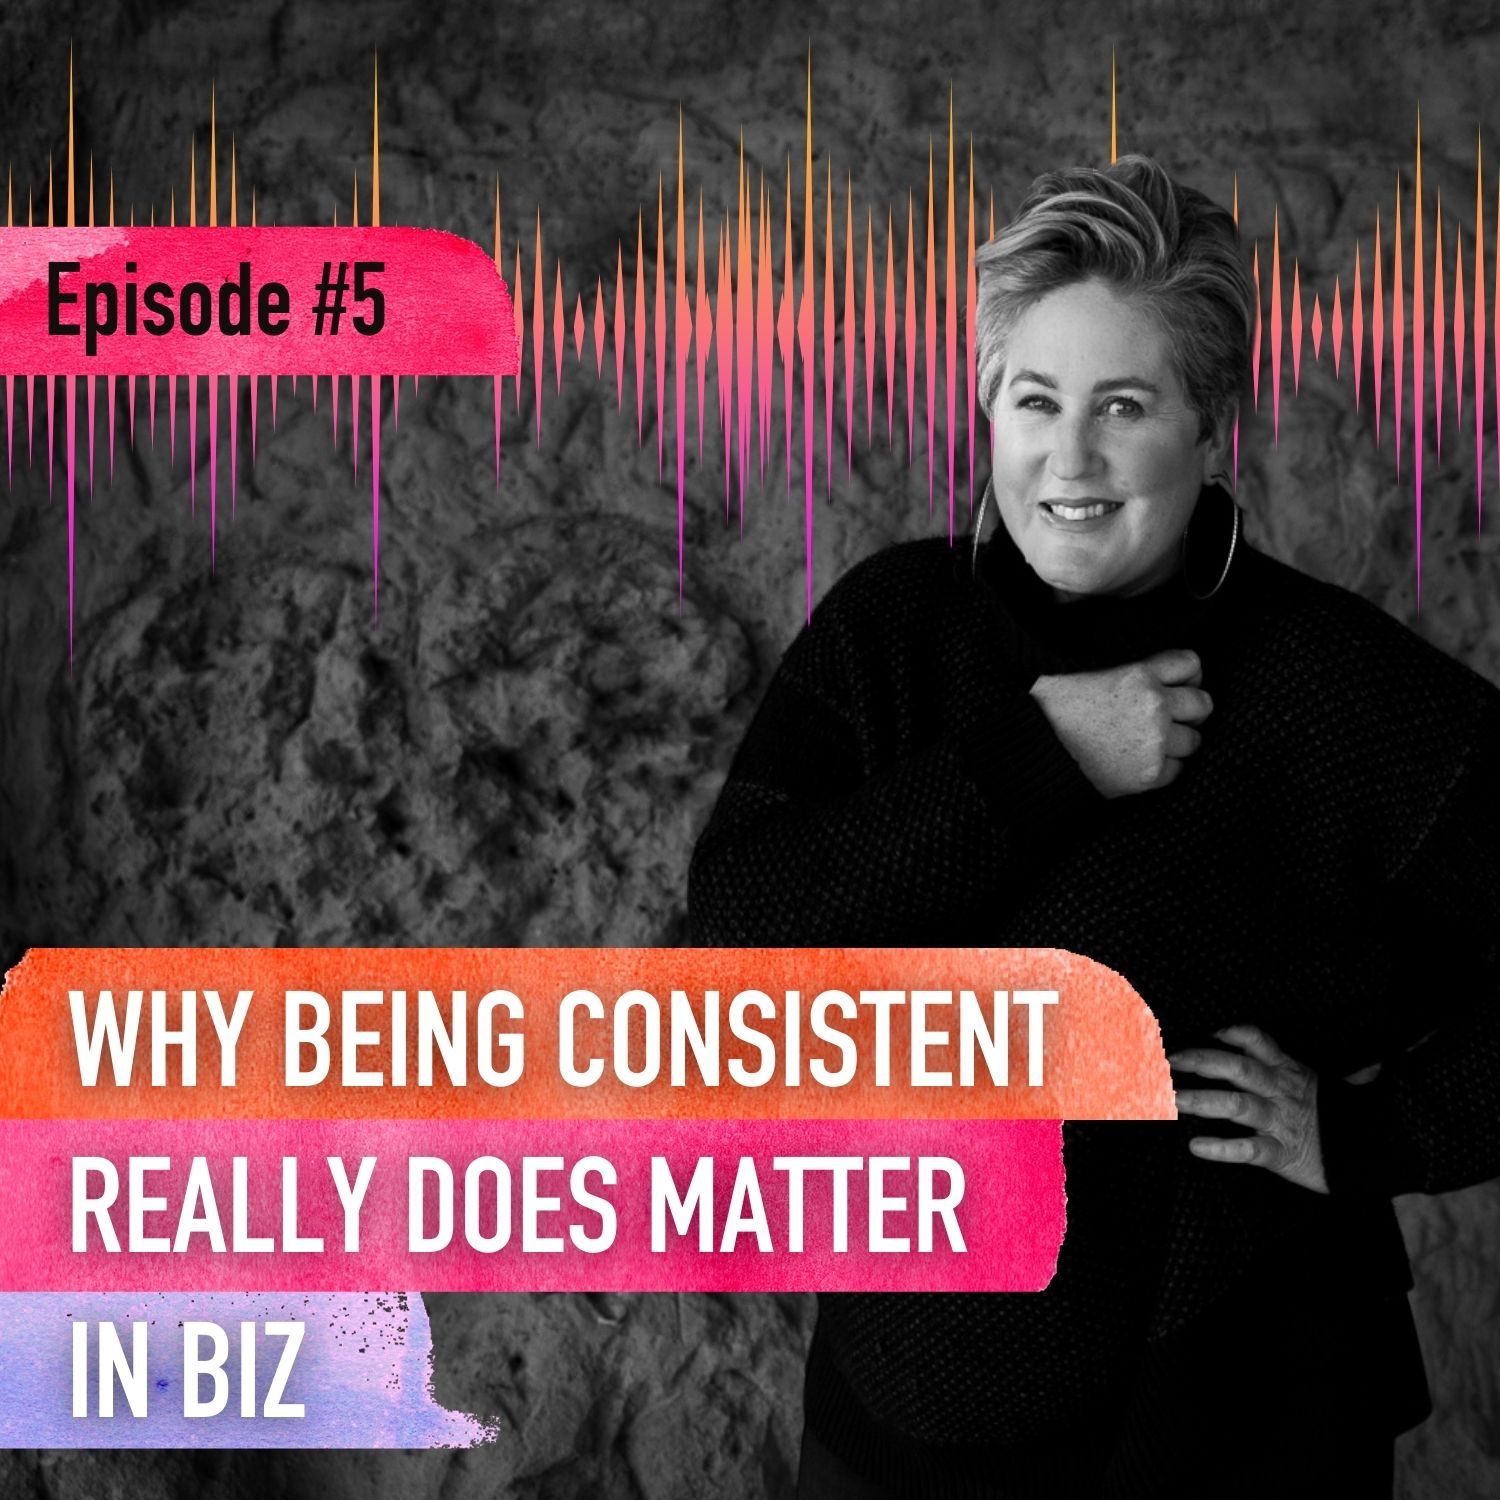 Podcast - Why being consistent in biz really does matter